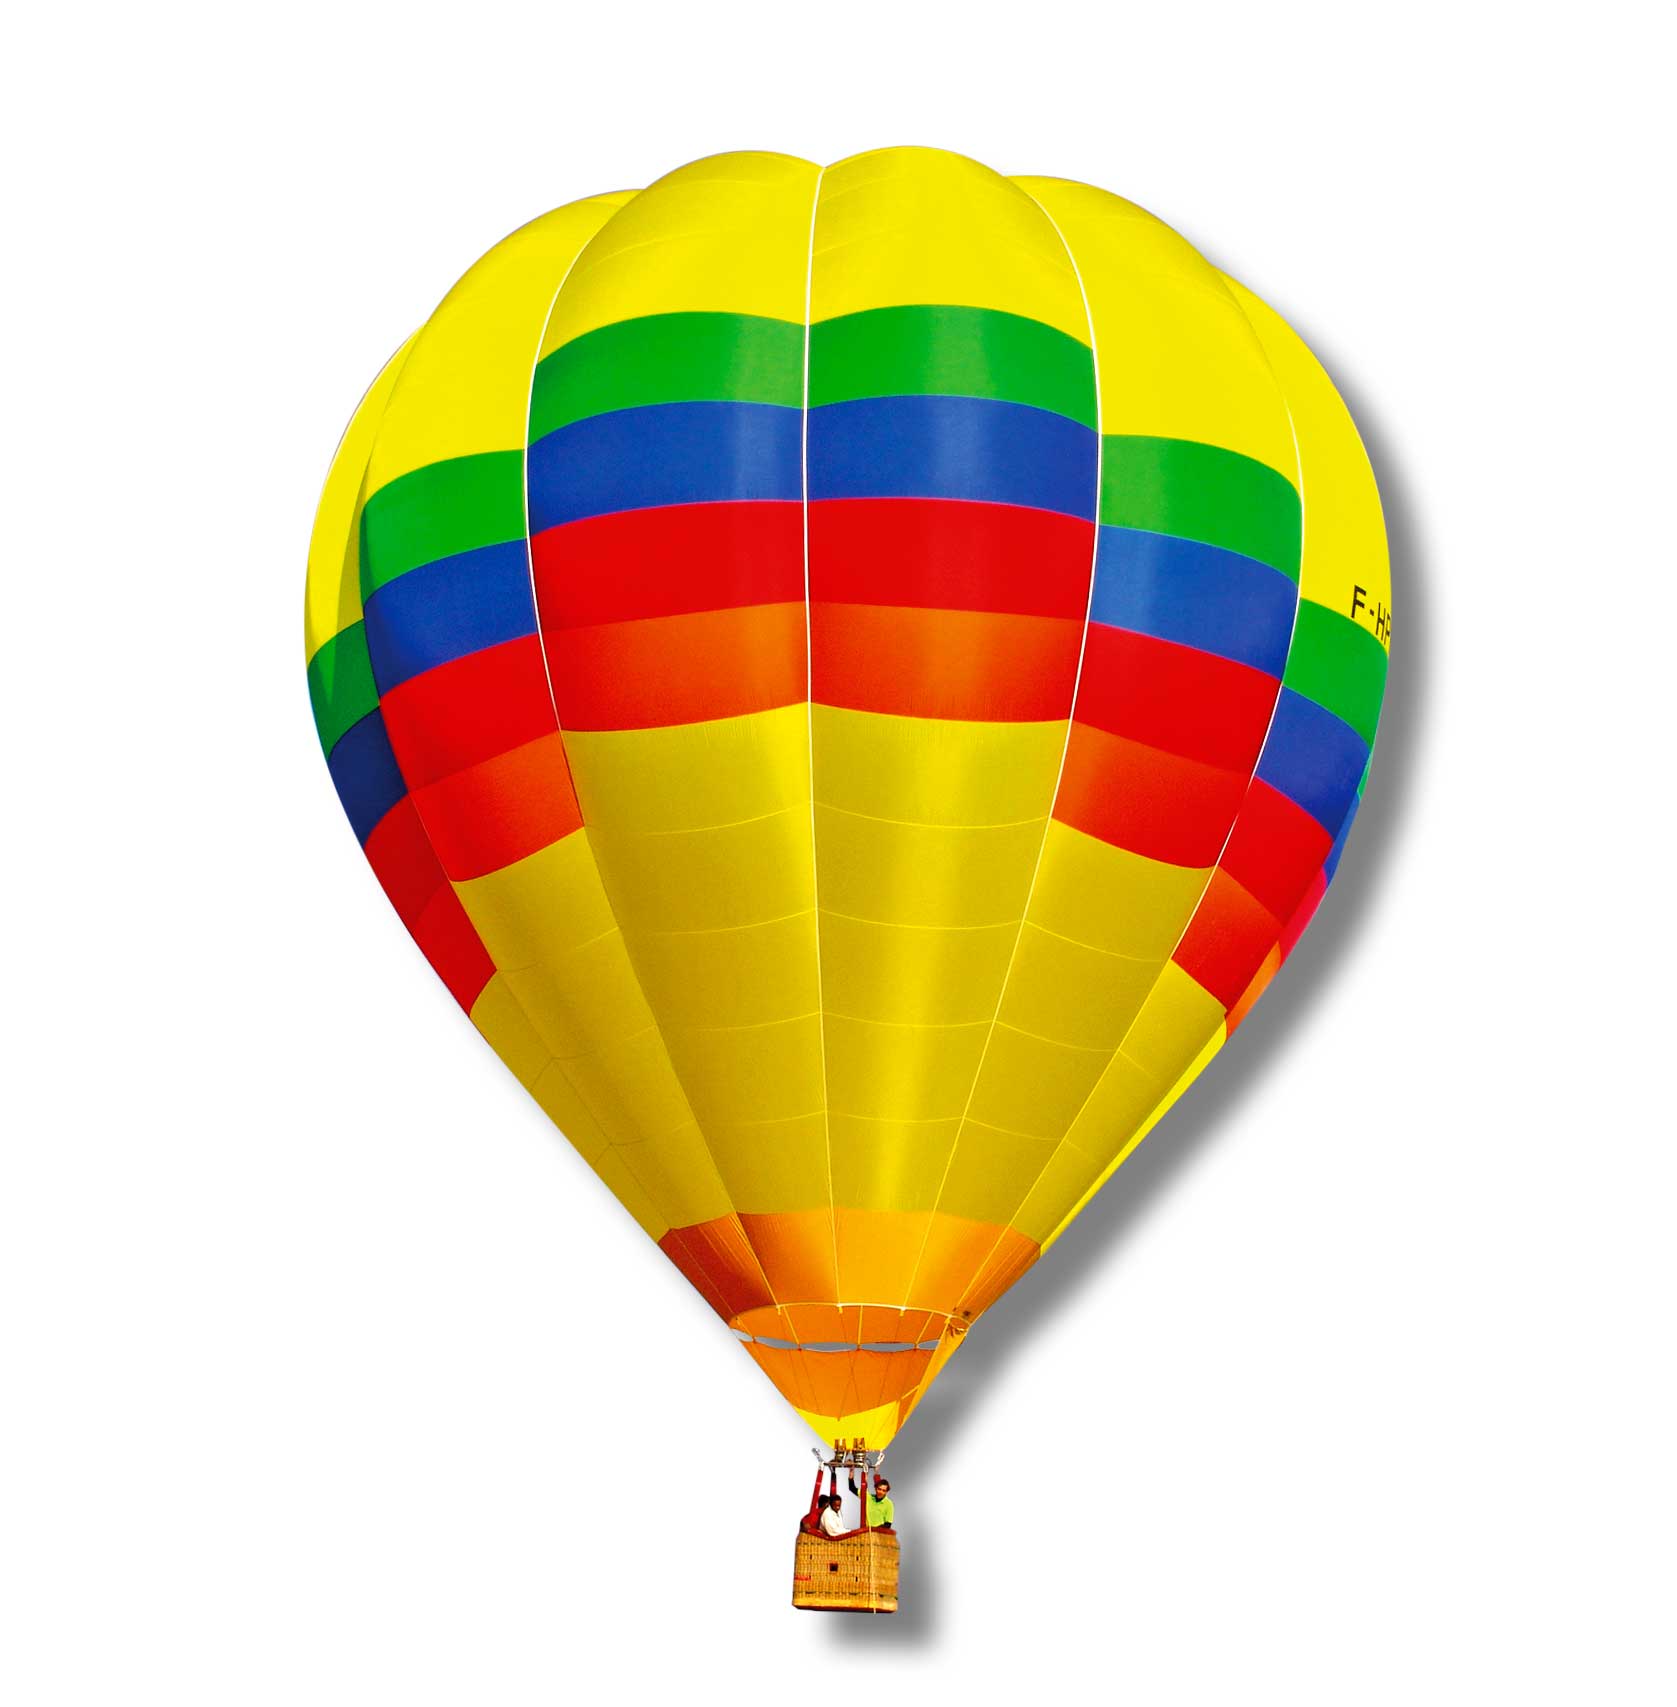 How Much Does It Cost For A Hot Air Balloon Ride?